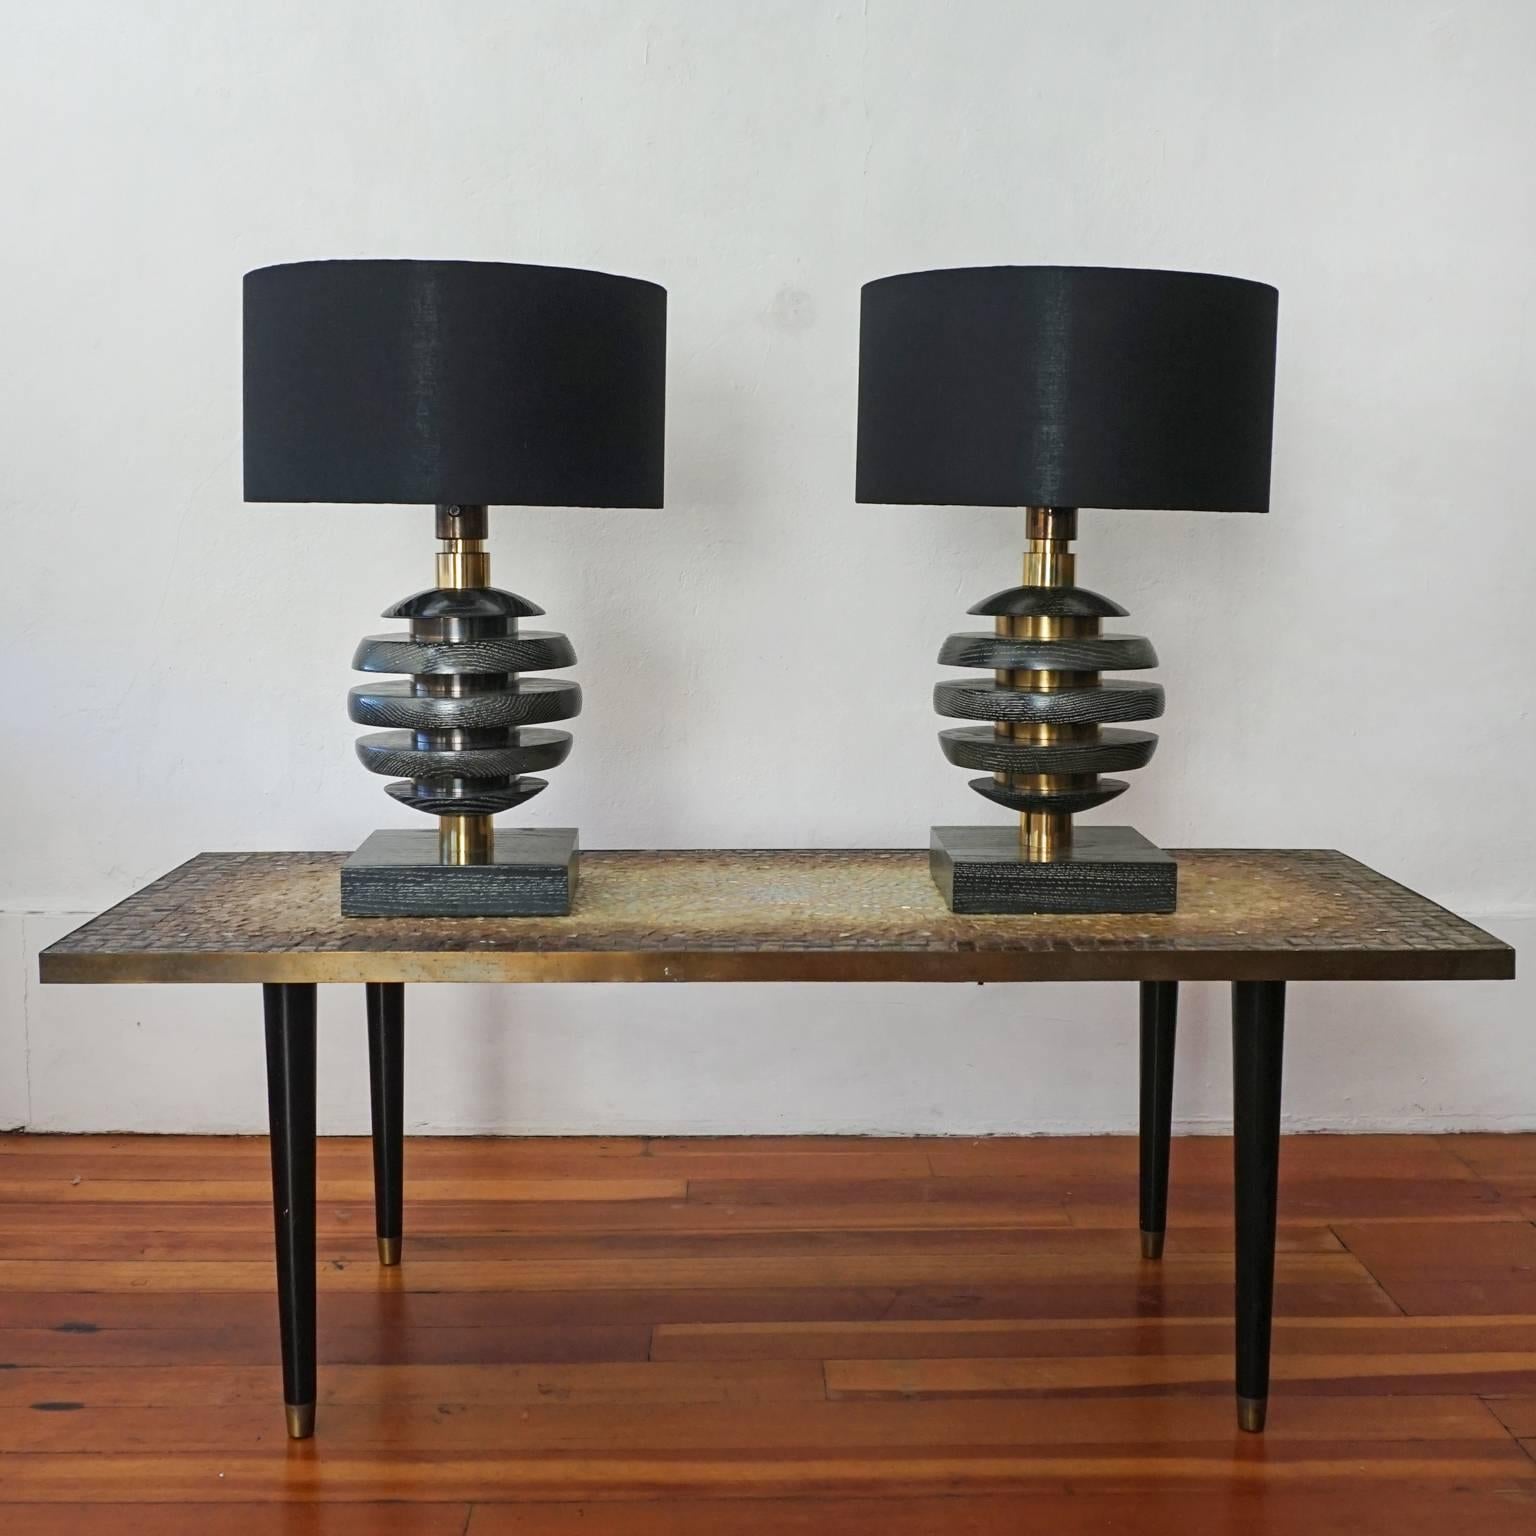 A pair of black cerused oak lamps from the 1940s. Brass hardware and milk glass inner shades. High quality construction. New black linen shades. 

Measure: Shades 15